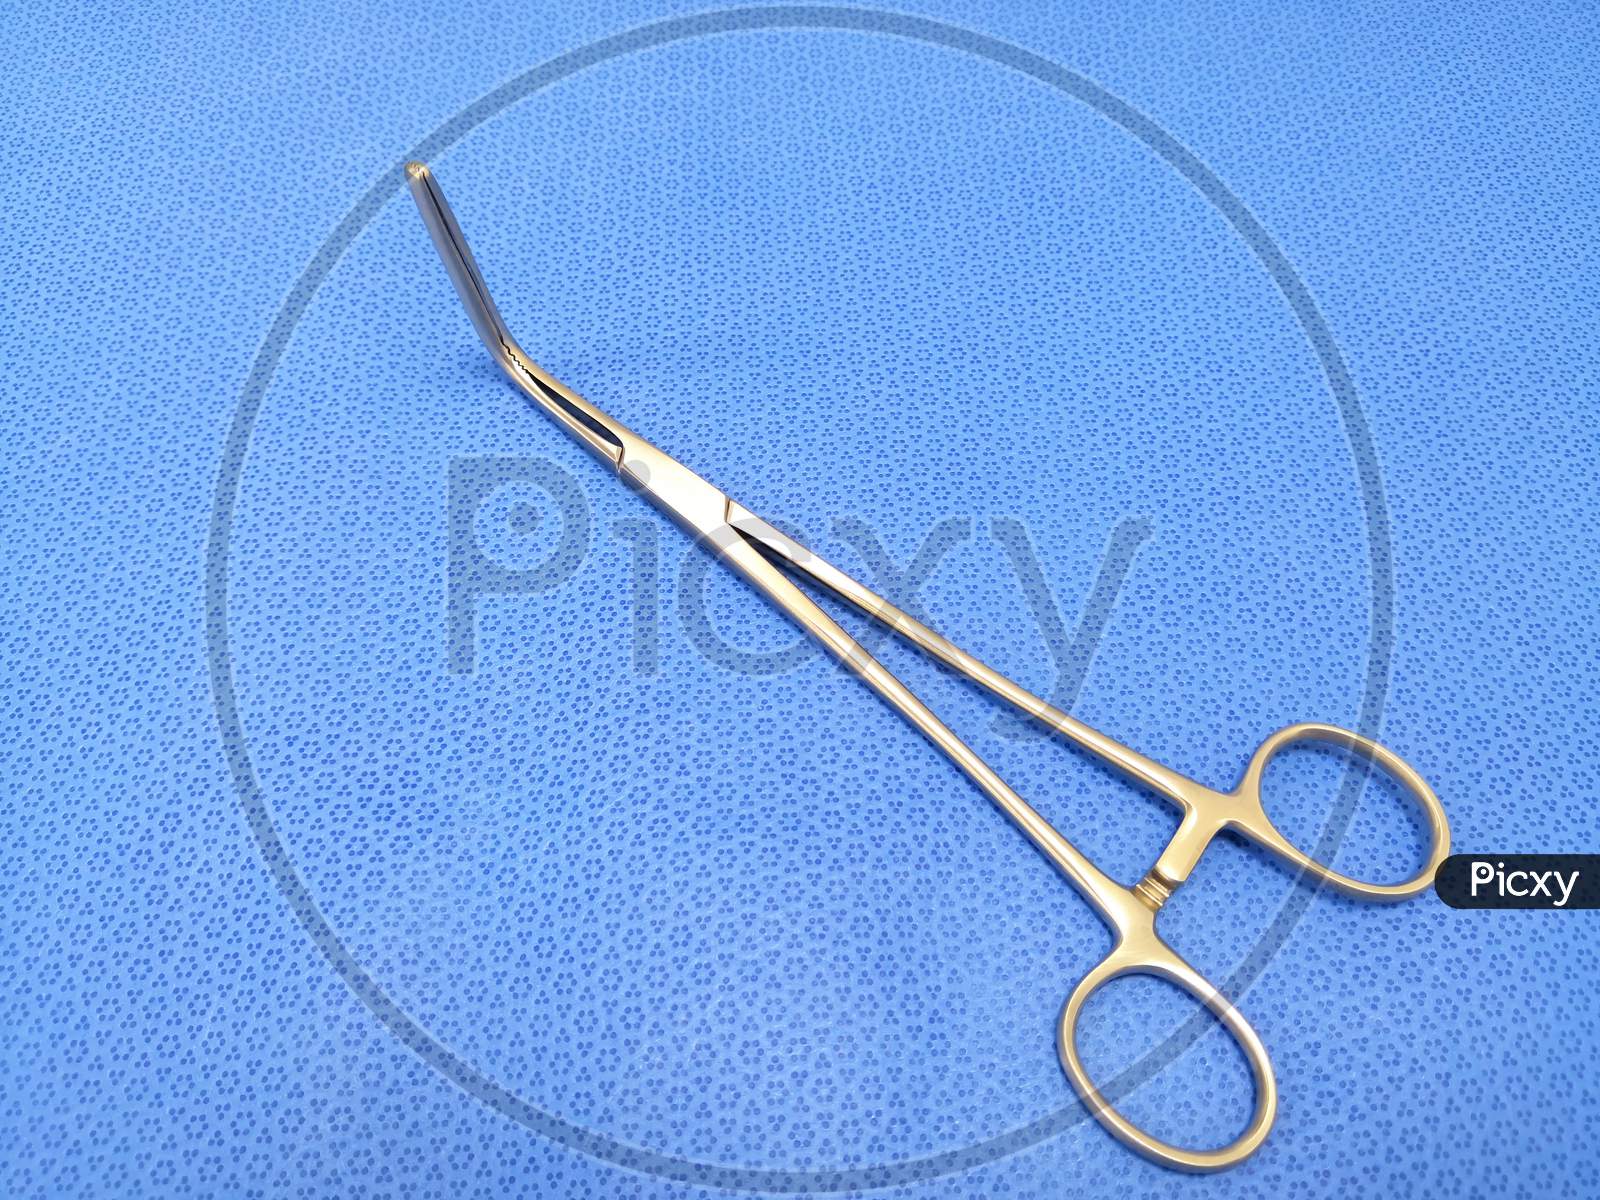 Medical Surgical Instrument Right Angle Forceps